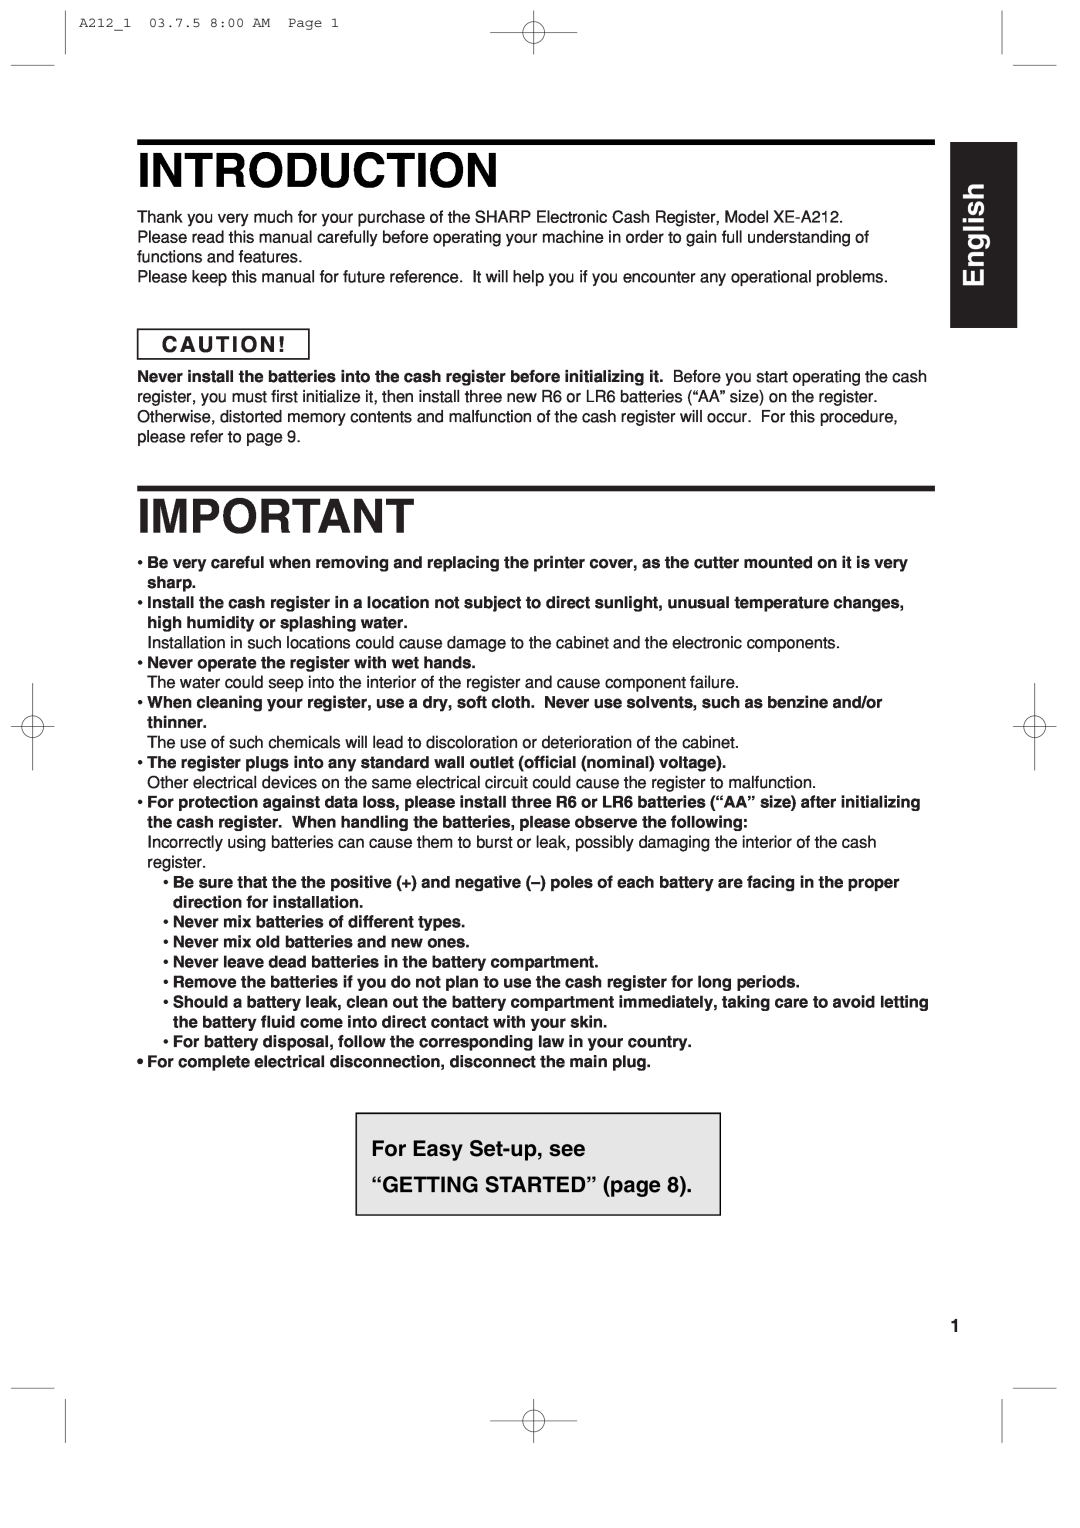 Sharp XE-A212 instruction manual Introduction, C A U T I O N, For Easy Set-up, see “GETTING STARTED” page, English English 